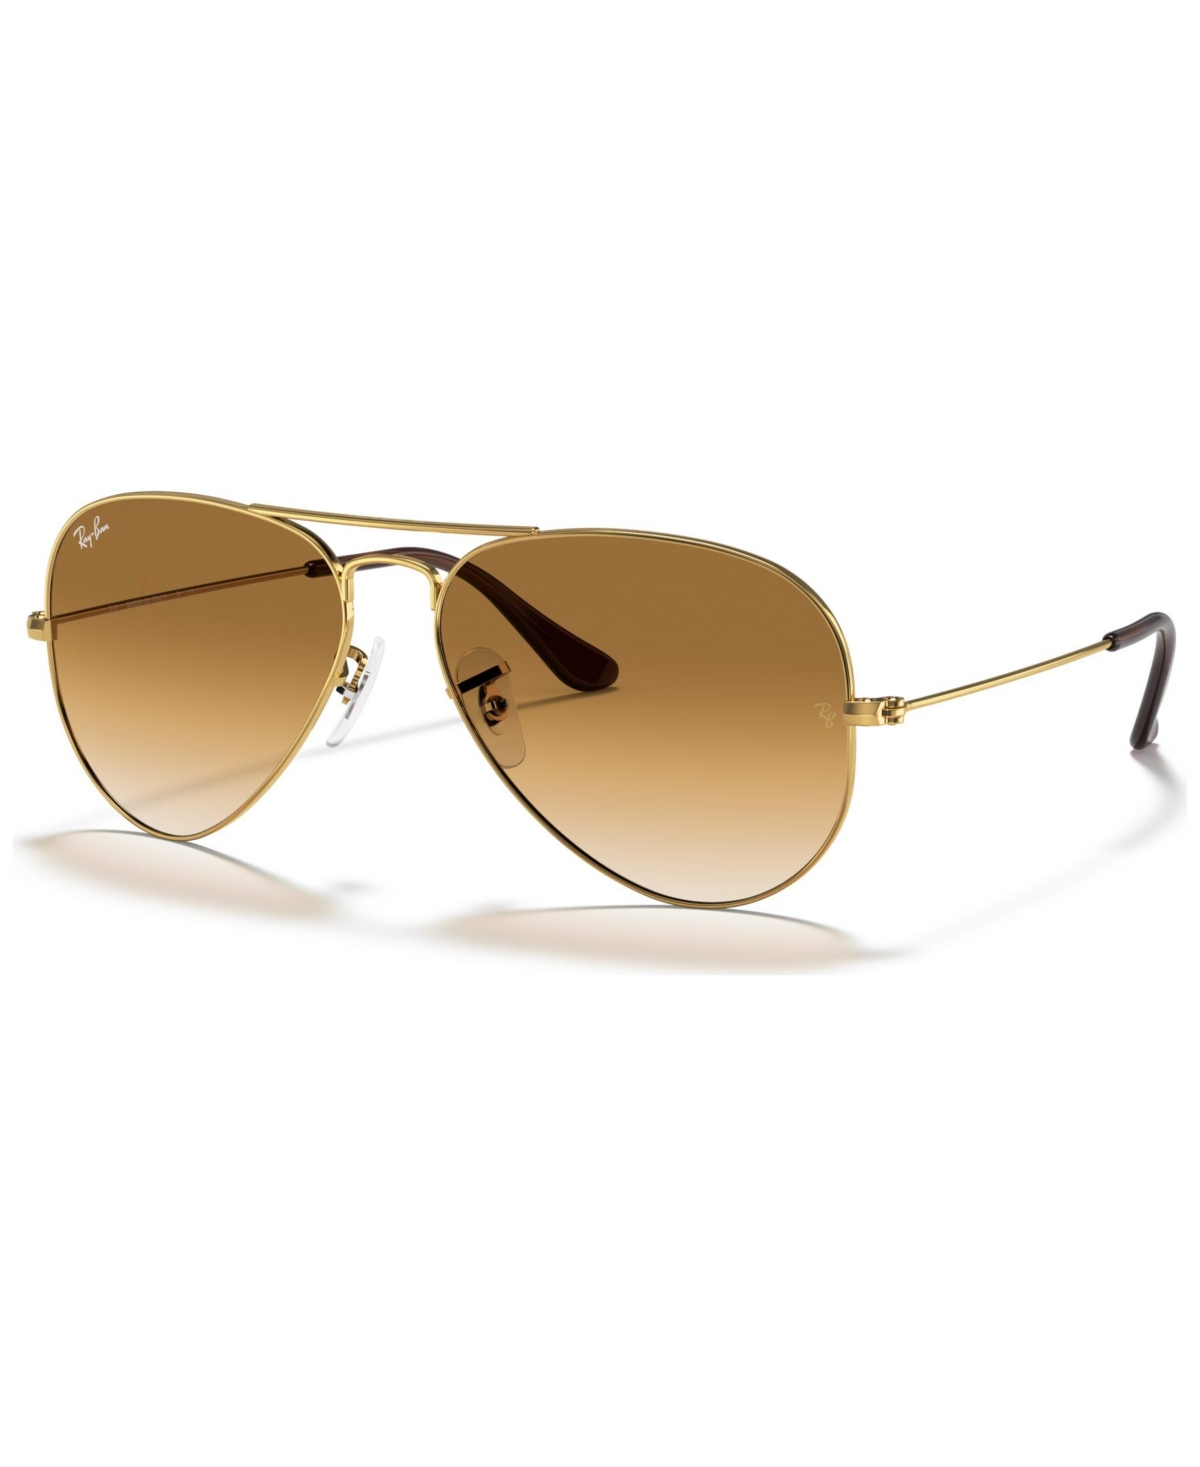 Ray Ban Unisex Sunglasses, Rb3025 Aviator Gradient In Gold,brown